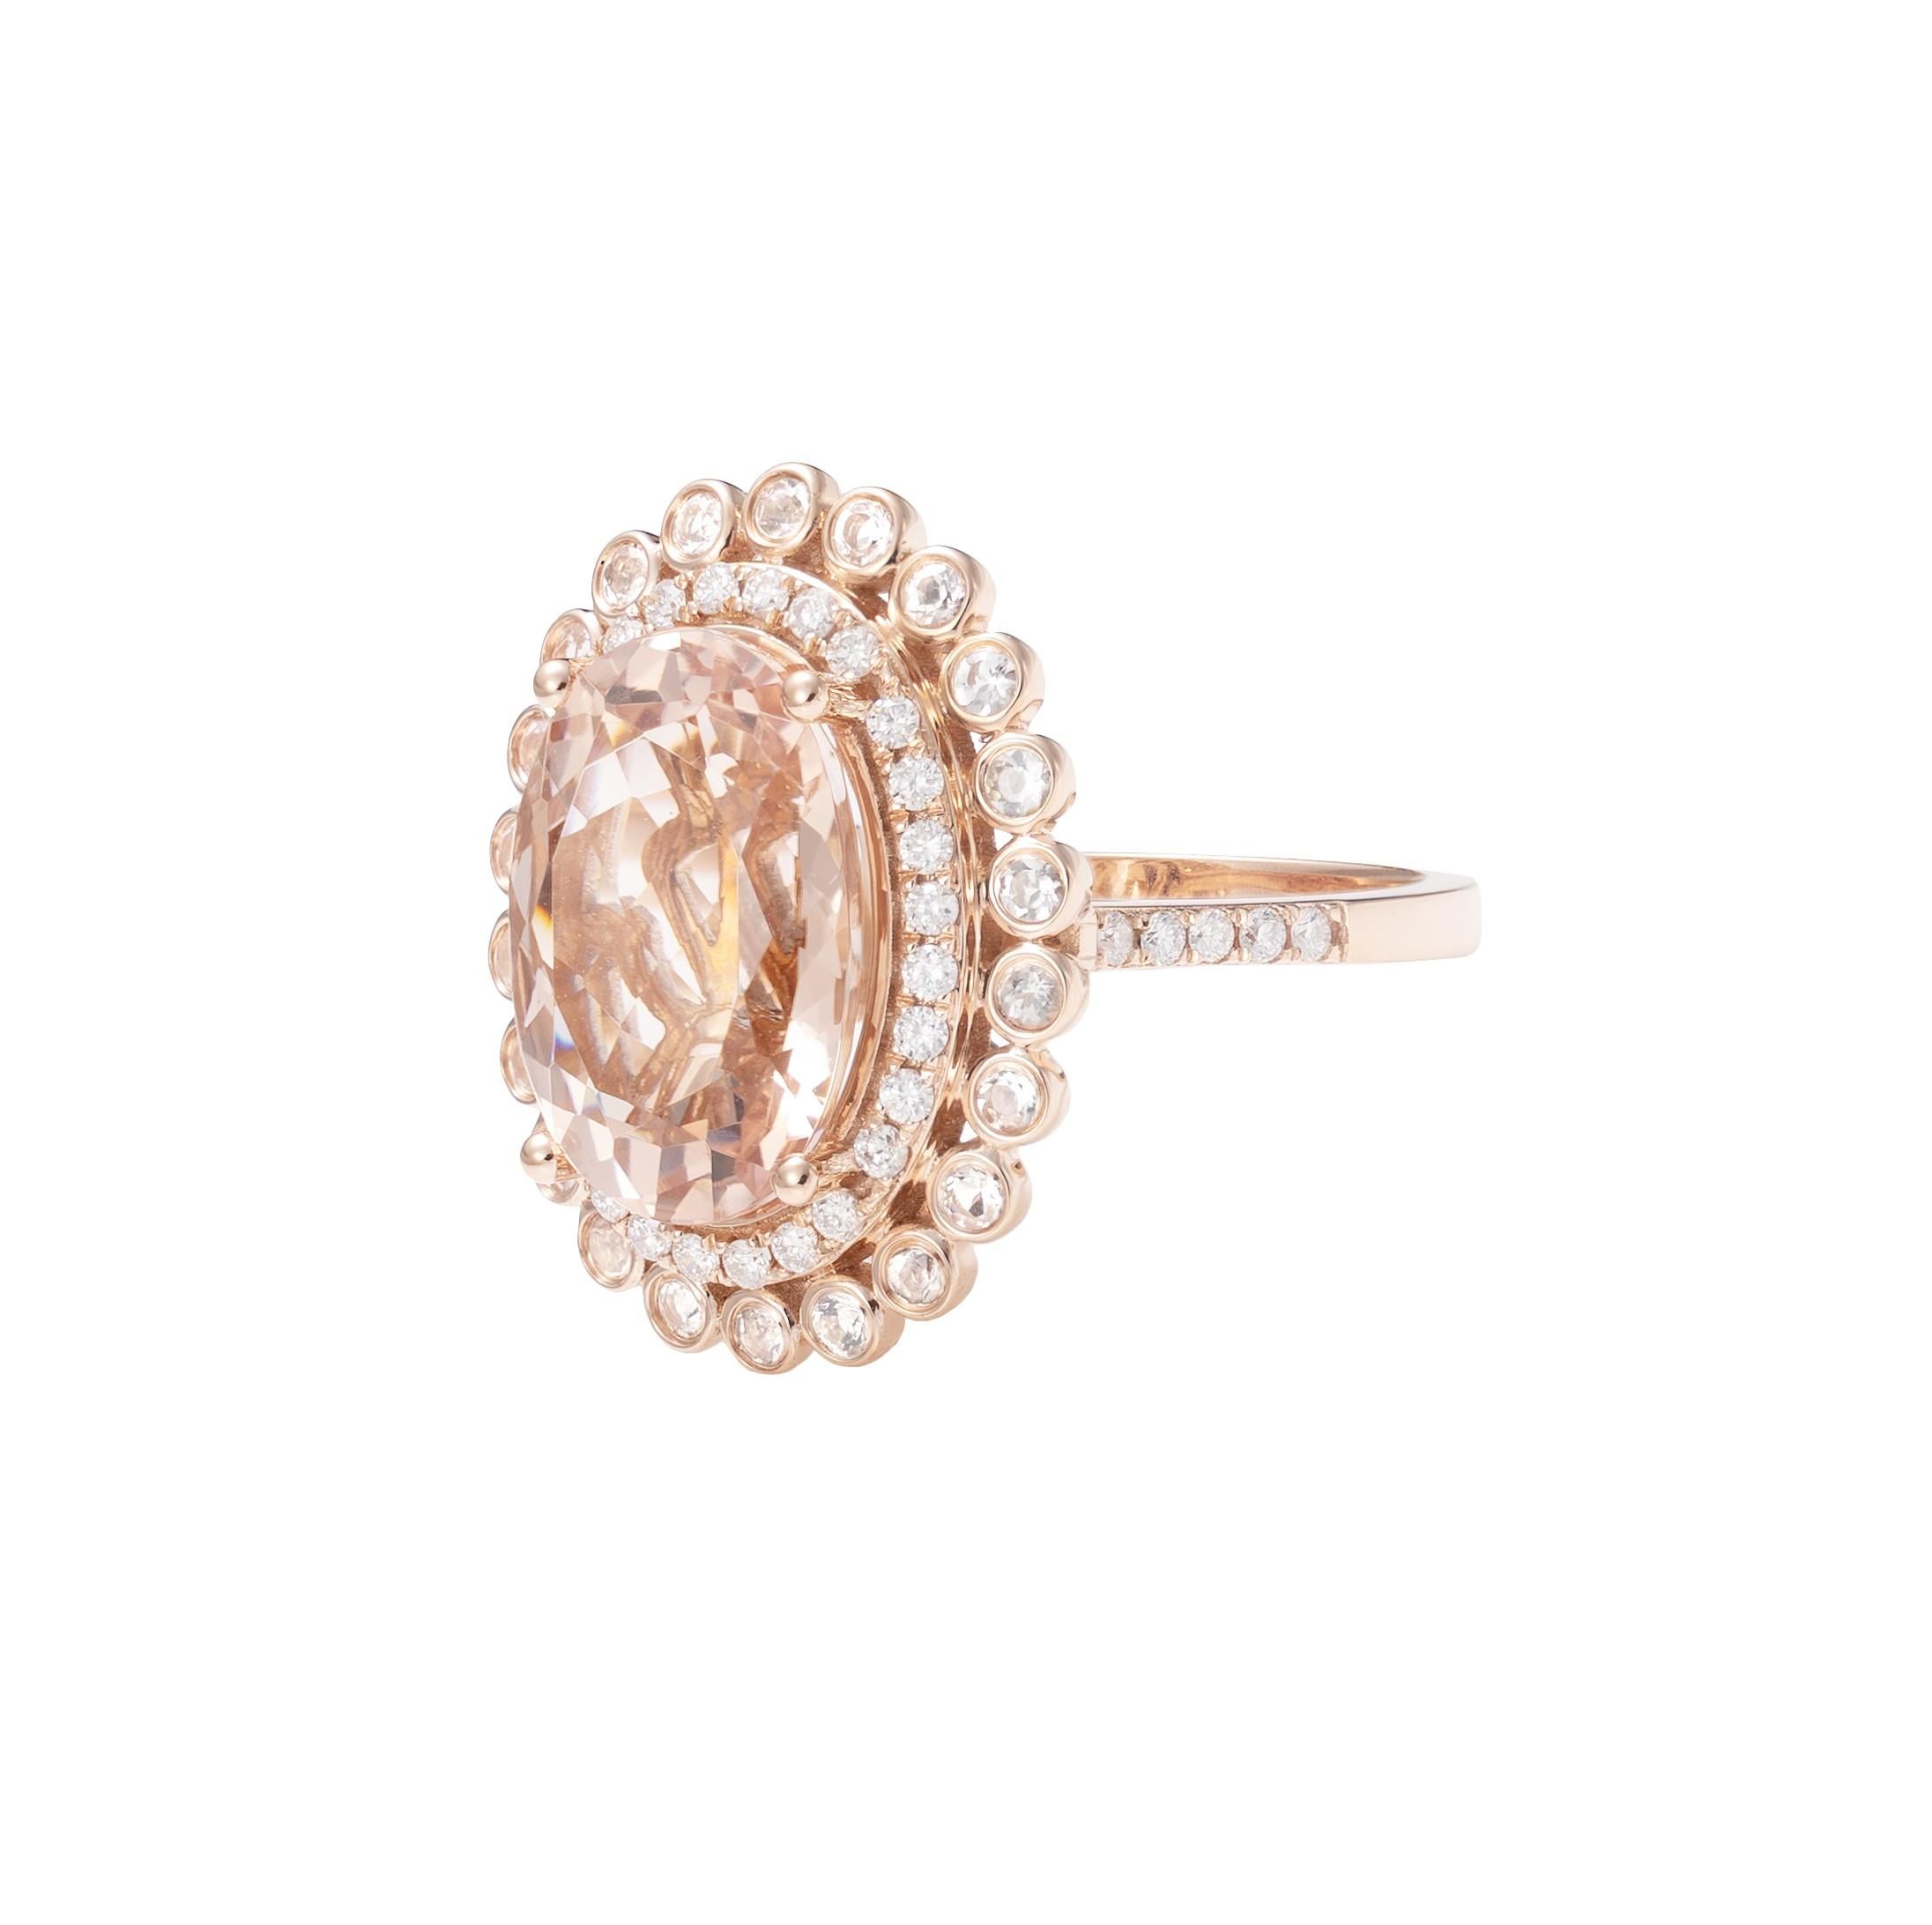 Contemporary 5.2 Carat Morganite and Diamond Ring in 18 Karat Rose Gold For Sale